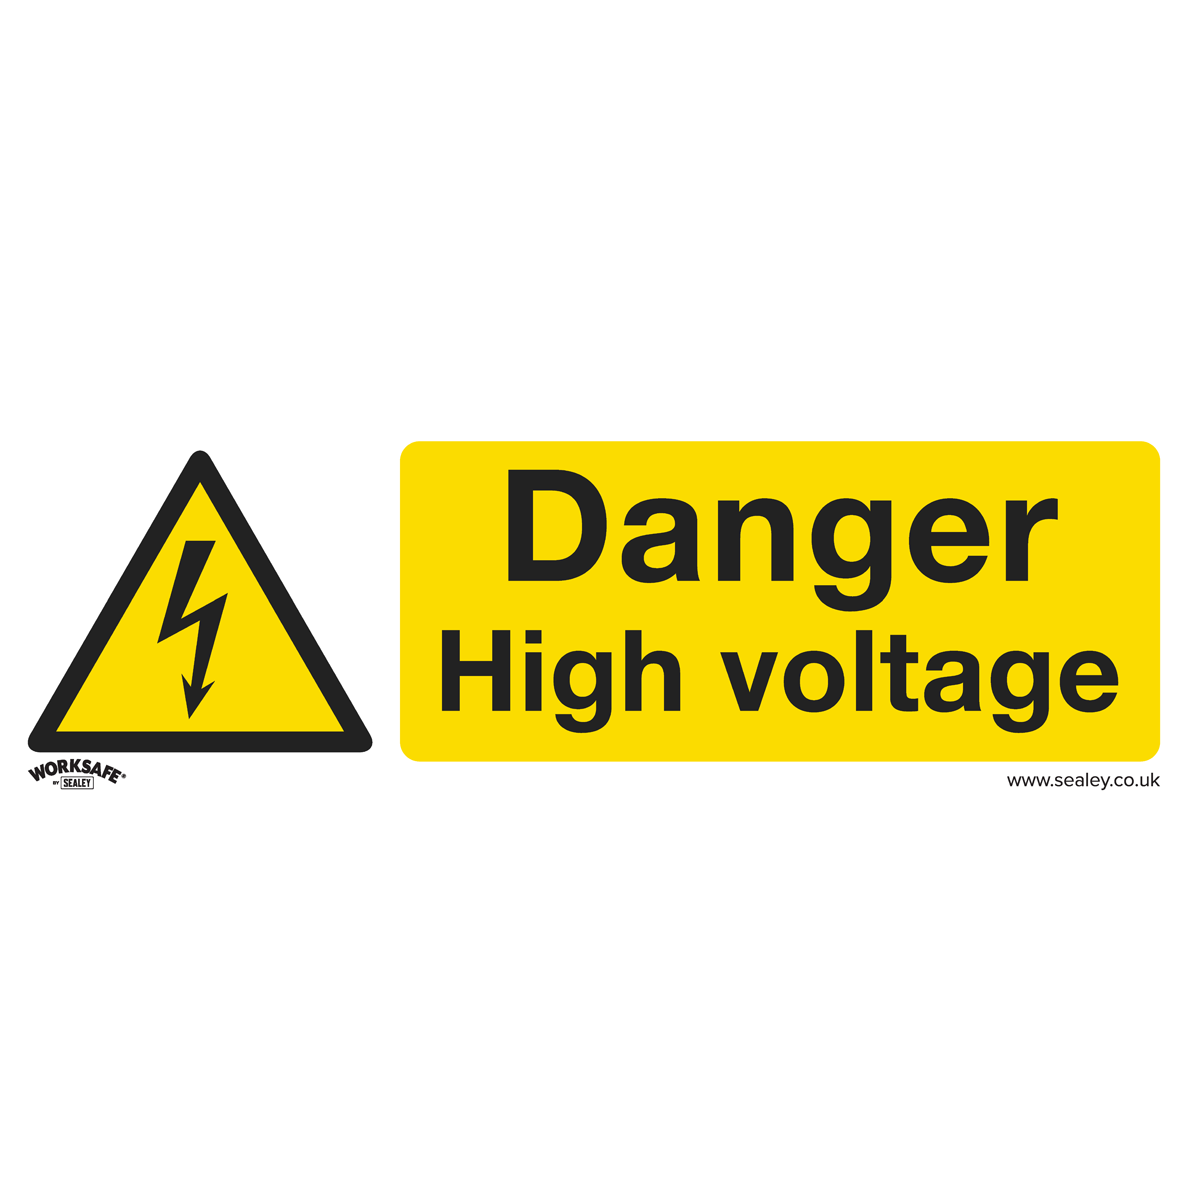 Warning Safety Sign - Danger High Voltage - Rigid Plastic - Pack of 10 - SS48P10 - Farming Parts